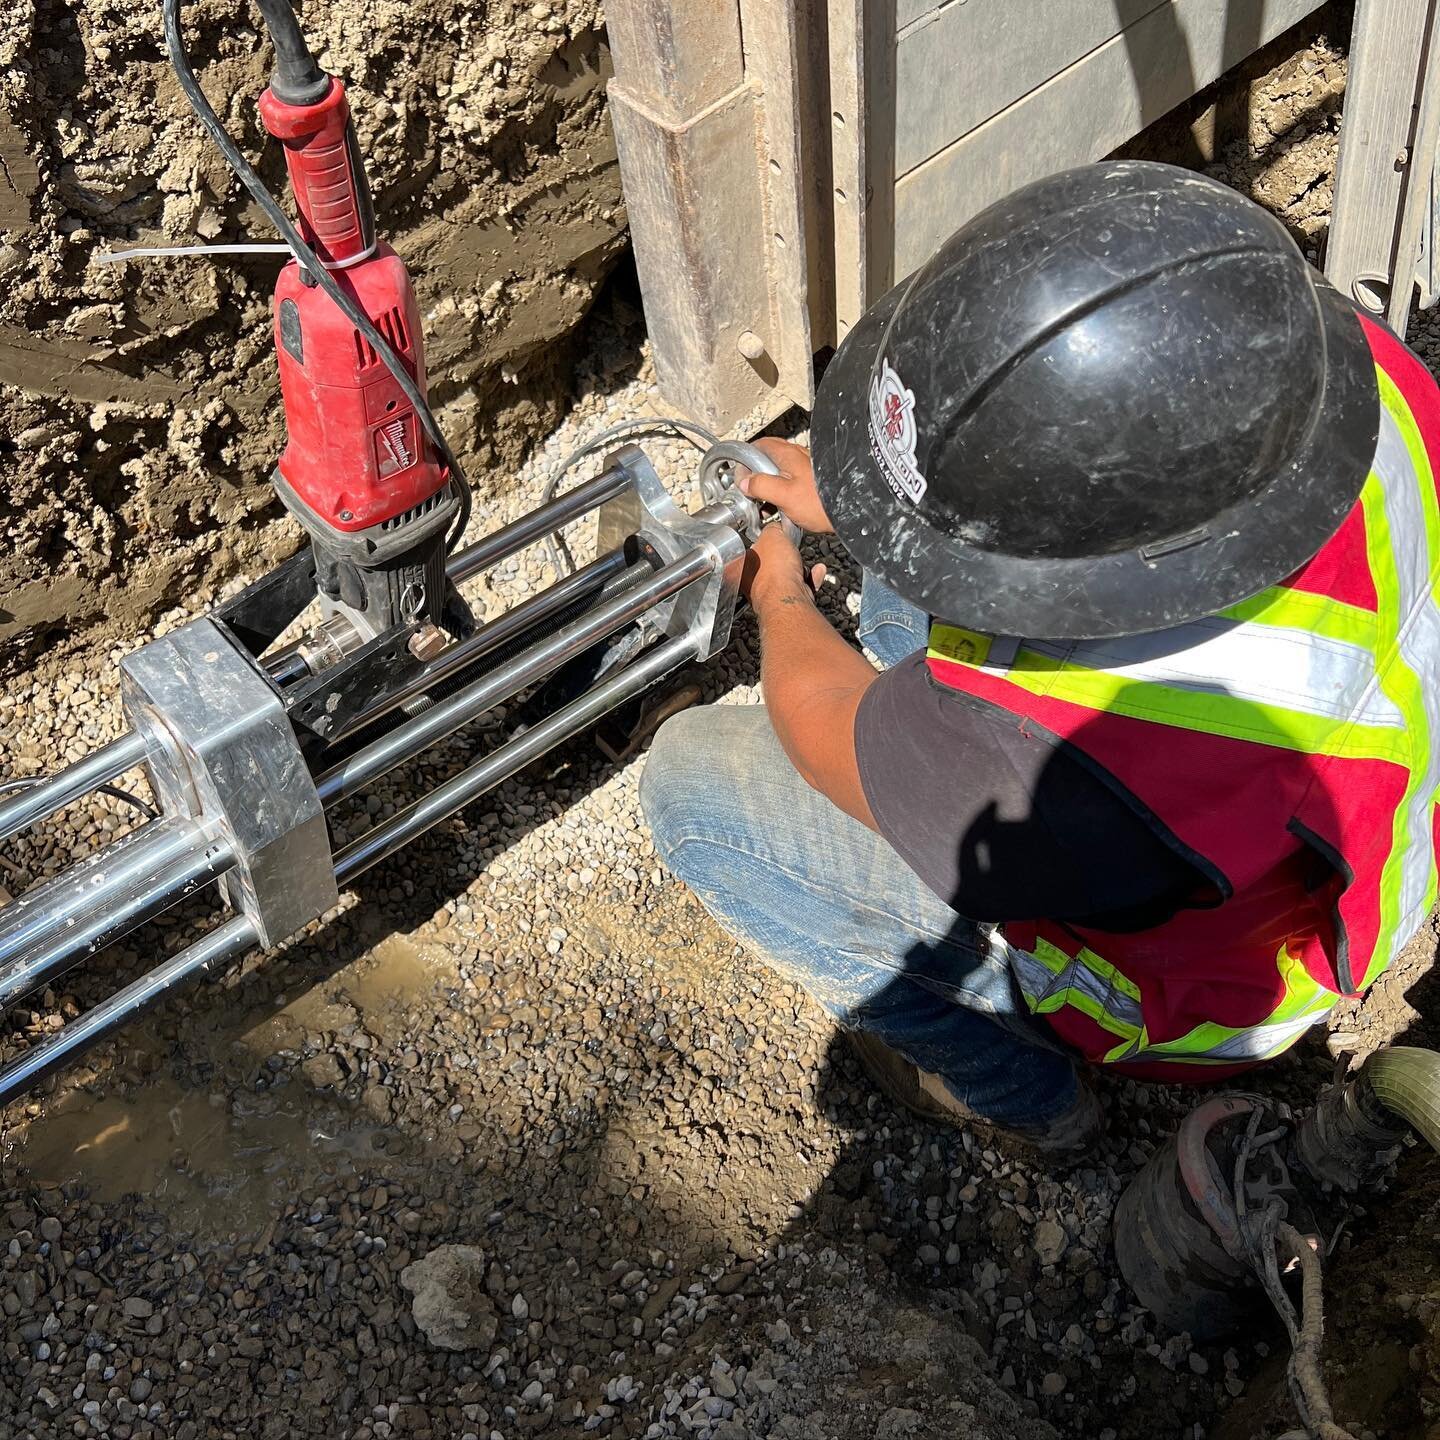 12X6 PVC Hot Tap dons in Calgary for our friends over at Kang Construction 🧰

#hottapping #plumbing #construction #trucks #hydrant #fyp #yyc #alberta #f4f #work #britishcolumbia #saskatchewan #hvac #clow #smith-blair